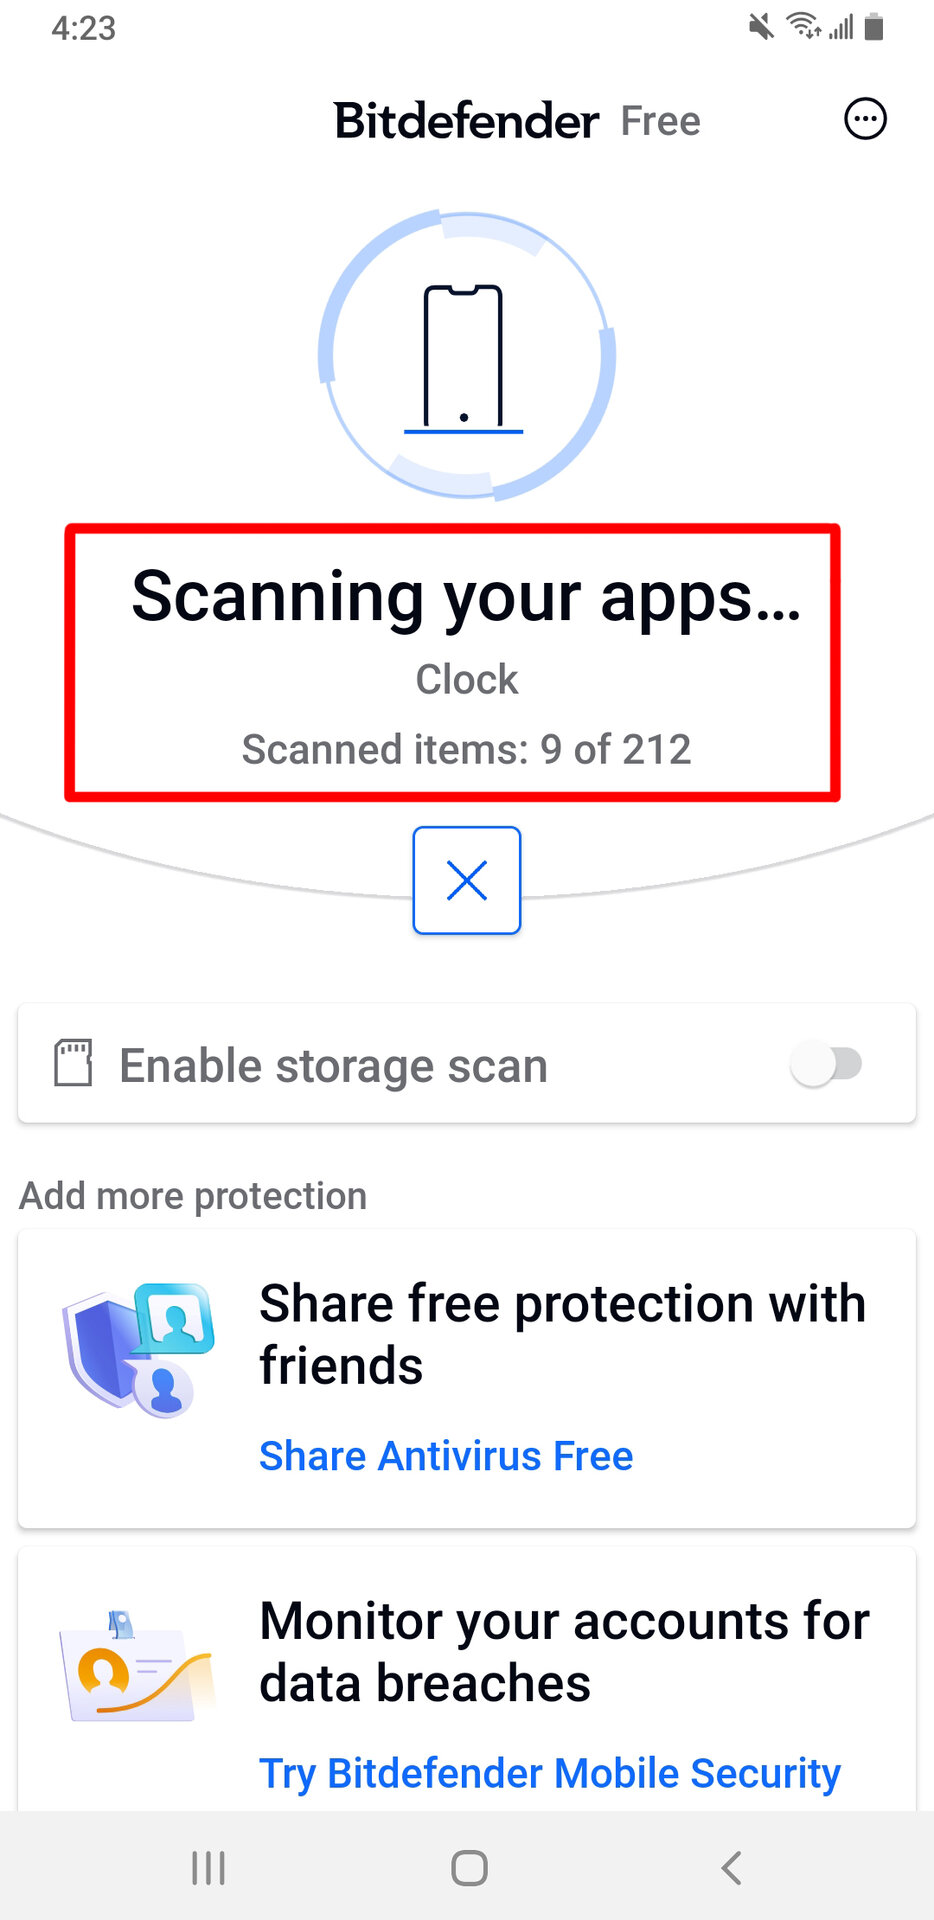 An Android Anti Malware Scanning app scanning a device.